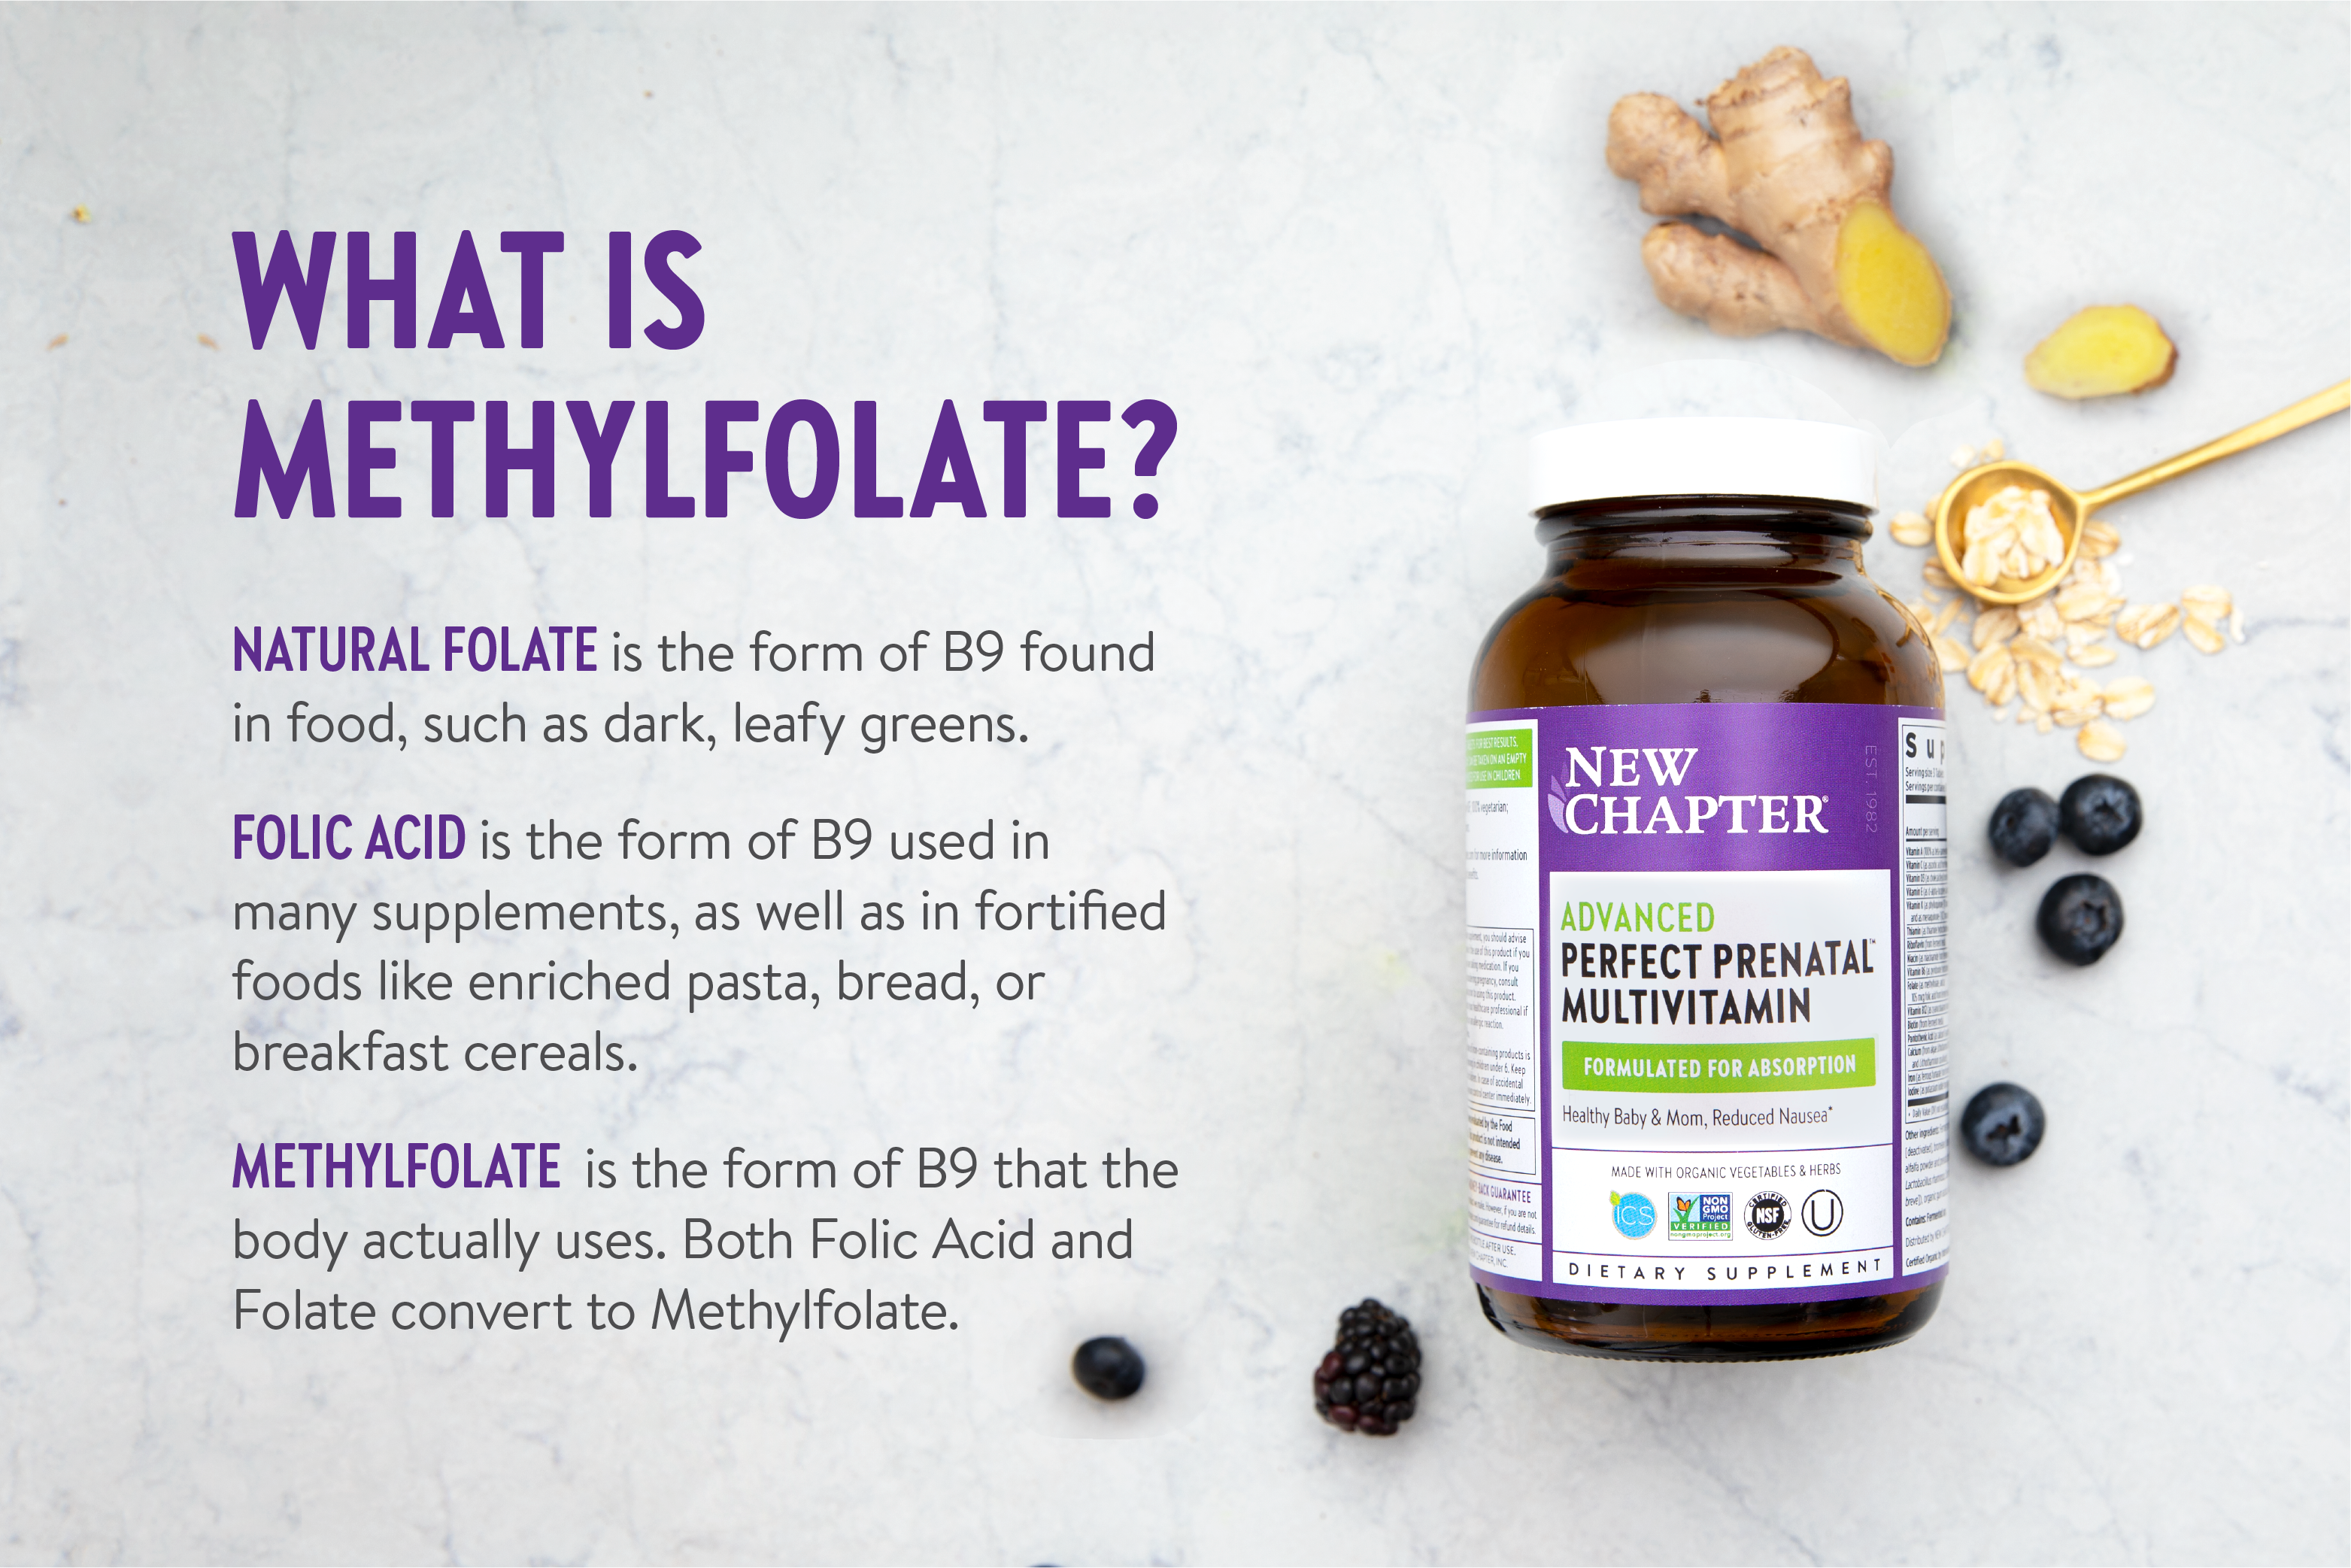 What is Methylfolate